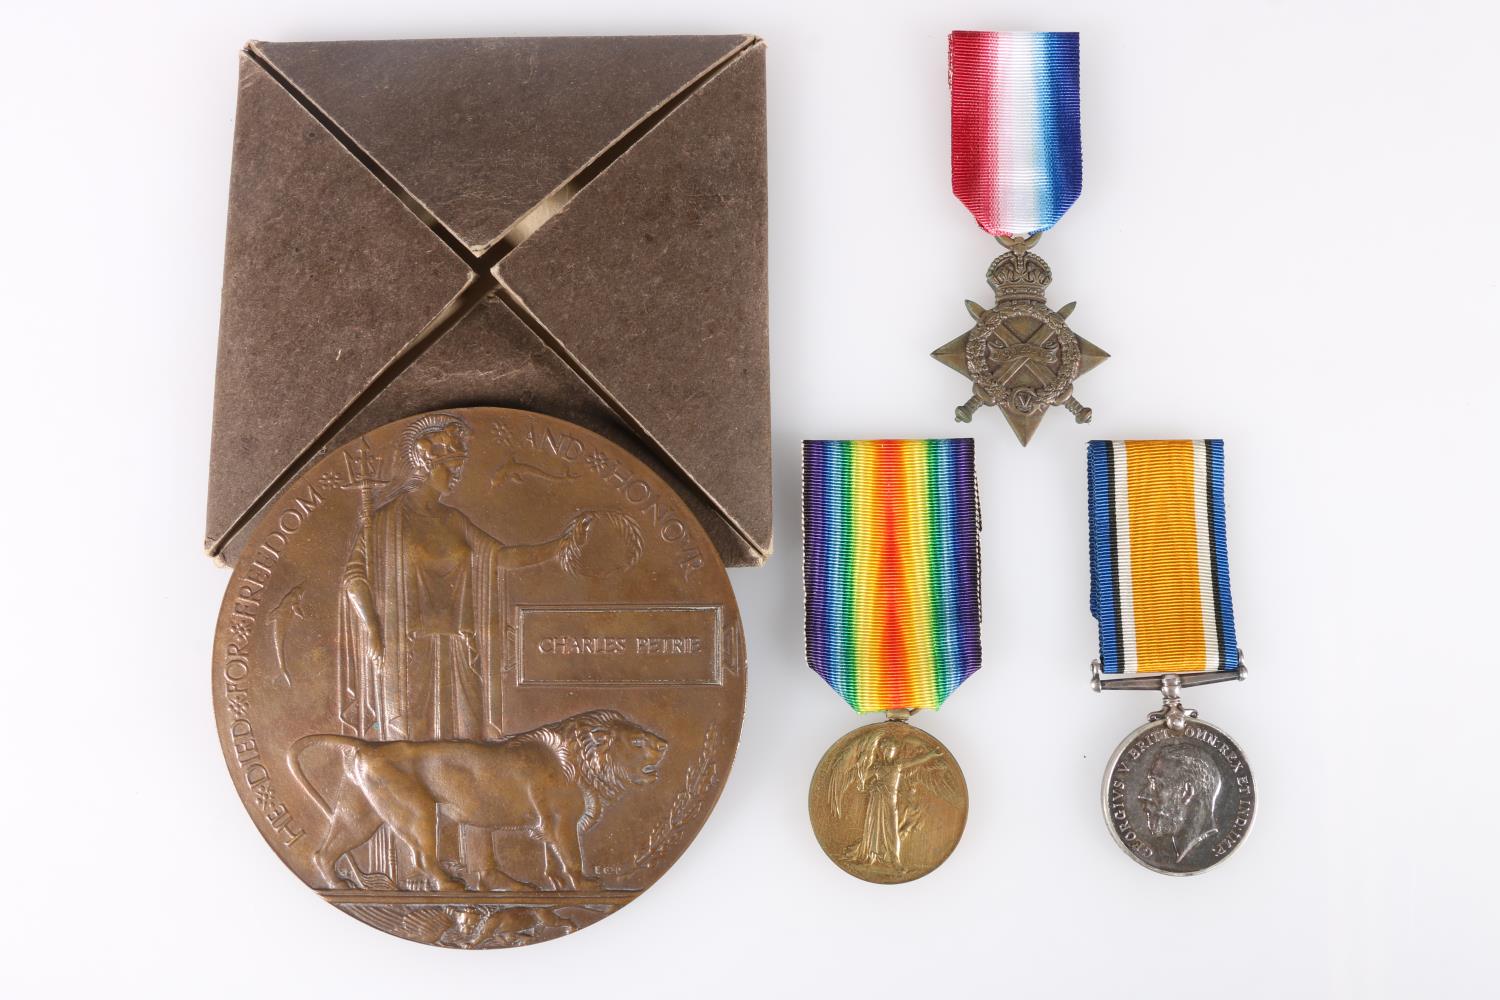 Medals of 3-6863 Private Charles Petrie of the 10th Battalion Gordon Highlanders comprising WWI